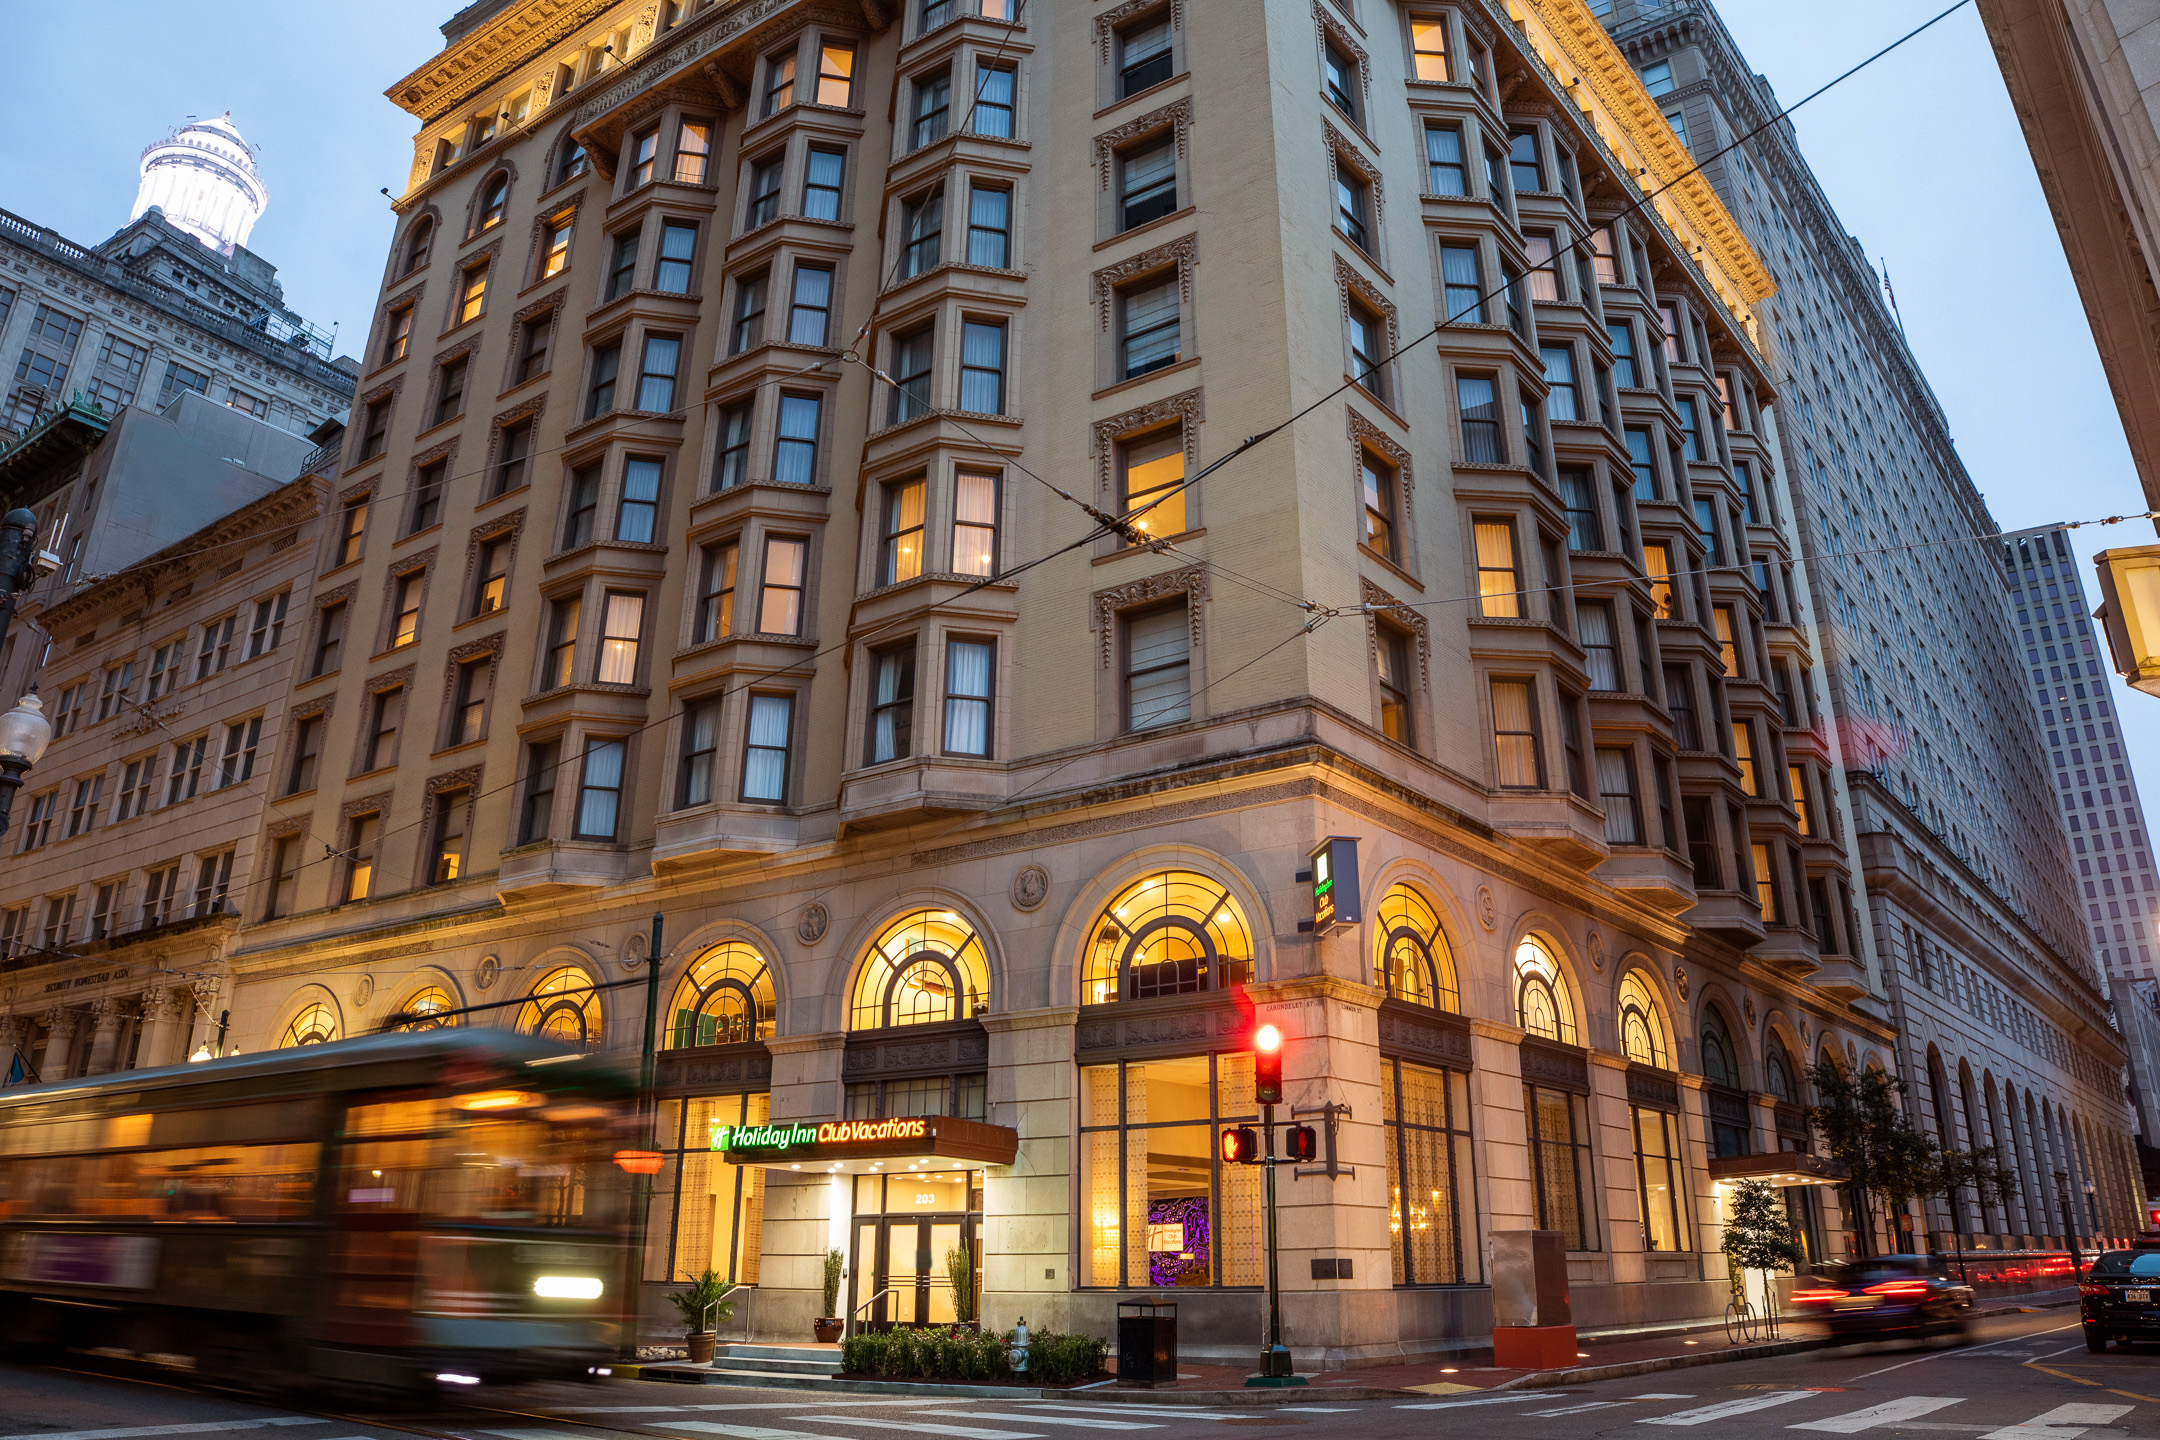 Holiday Inn Club Vacations Opens New Orleans Resort, Adds